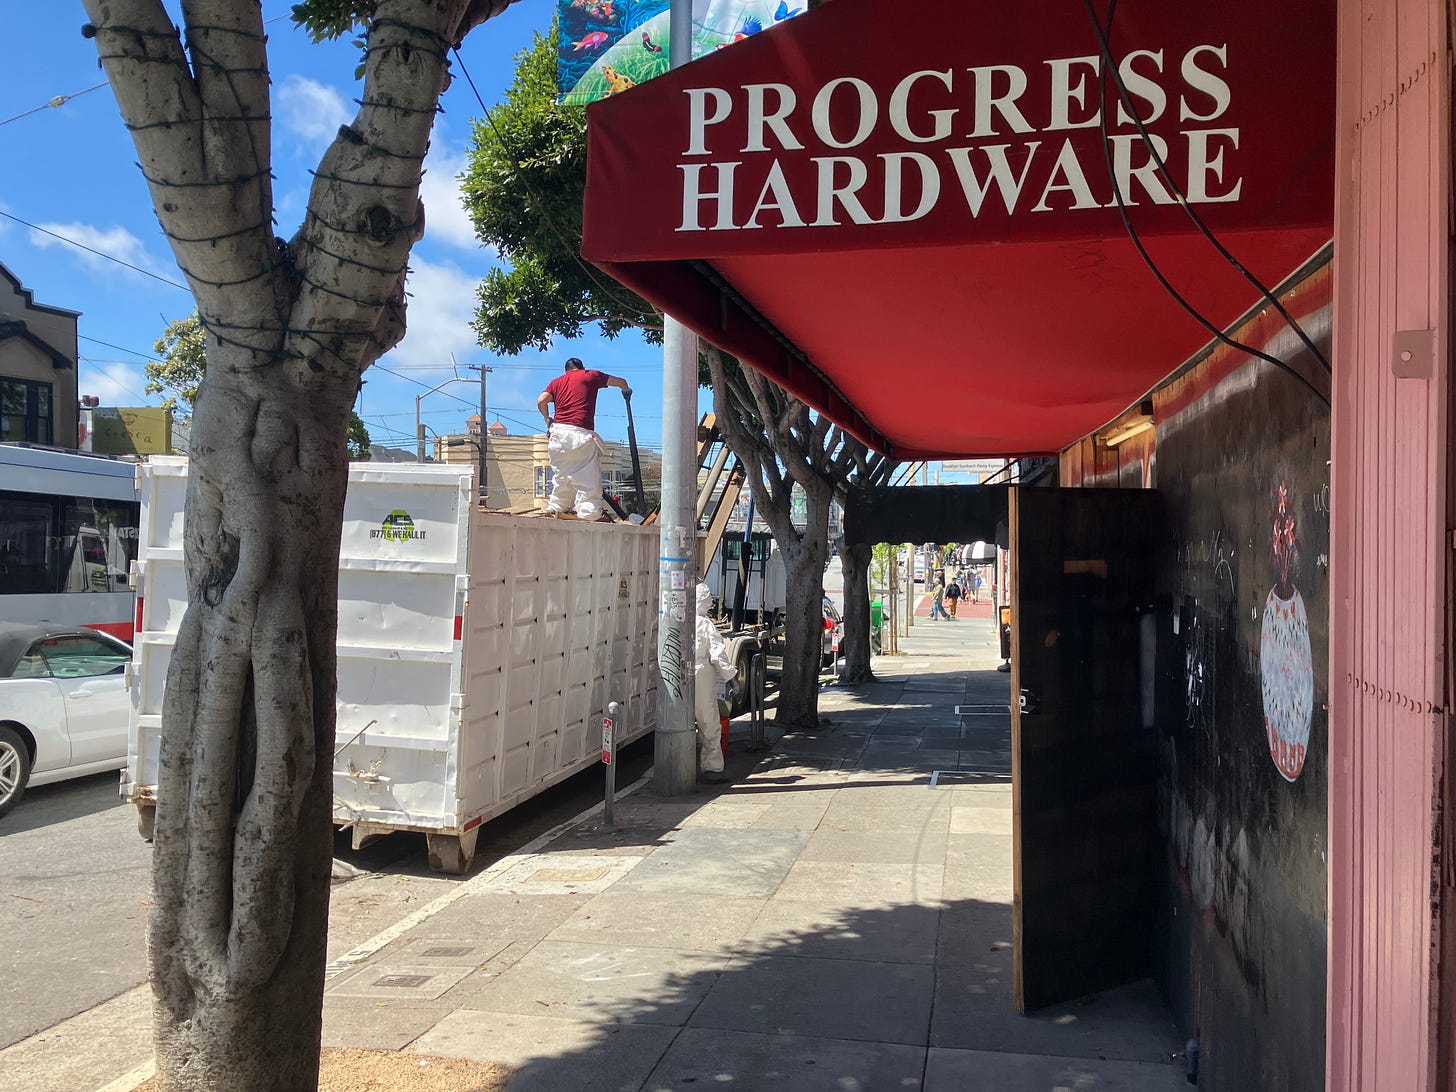 image of progress hardware store in SF from the outside, with the awning visisble. a debris box is in front of the store where workers are taking things in and out of the store